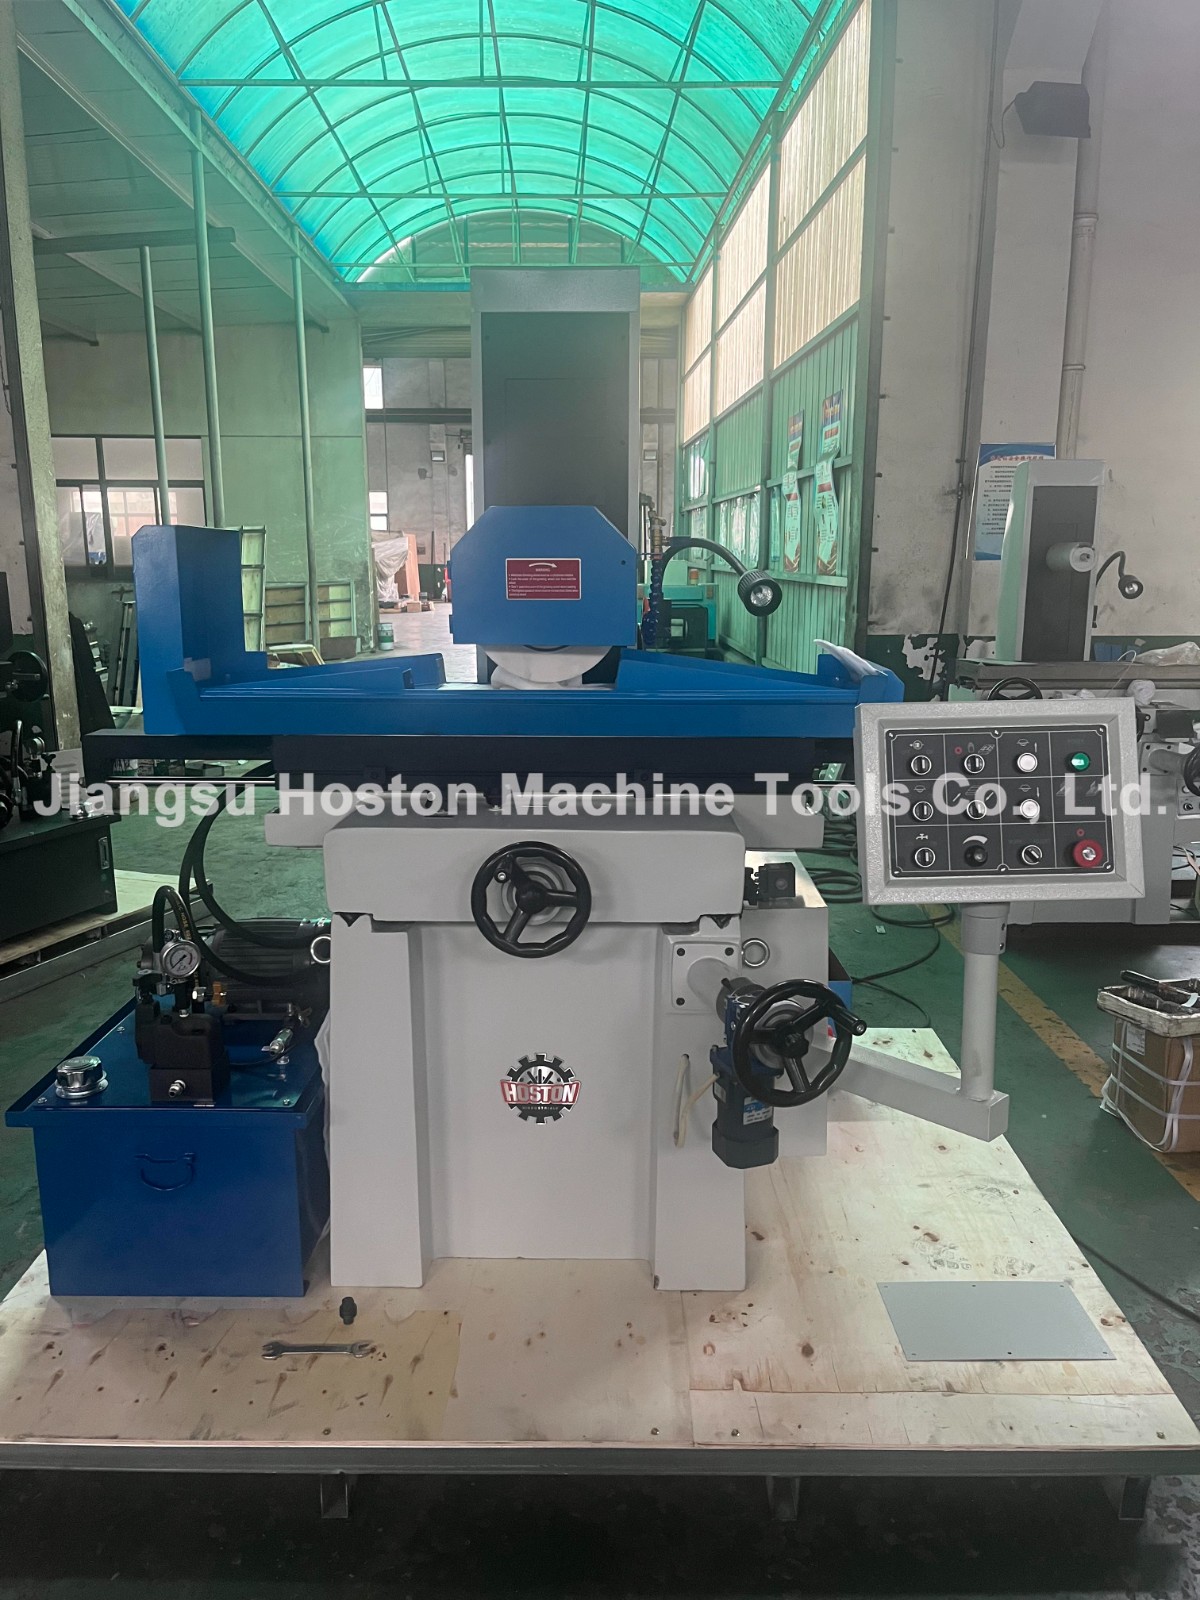 Hoston Surface Grinding Machine MY1224 is finished packing, waiting for delivery.